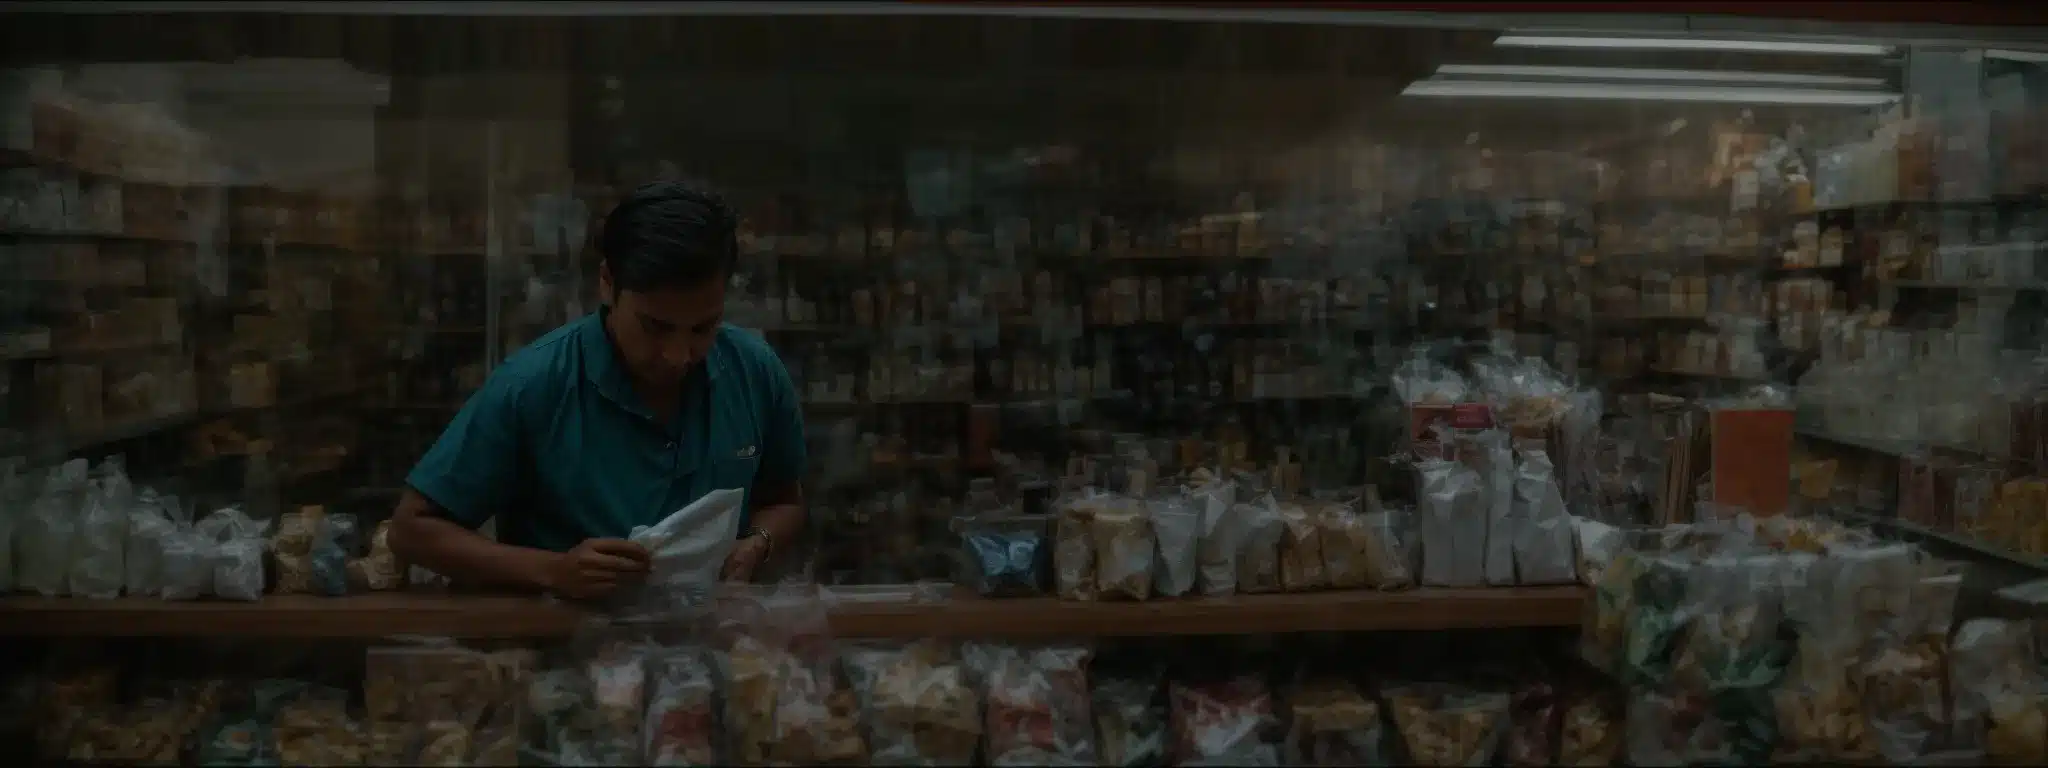 A Shopkeeper Arranging Products In A Storefront Window To Attract And Engage Passing Customers.